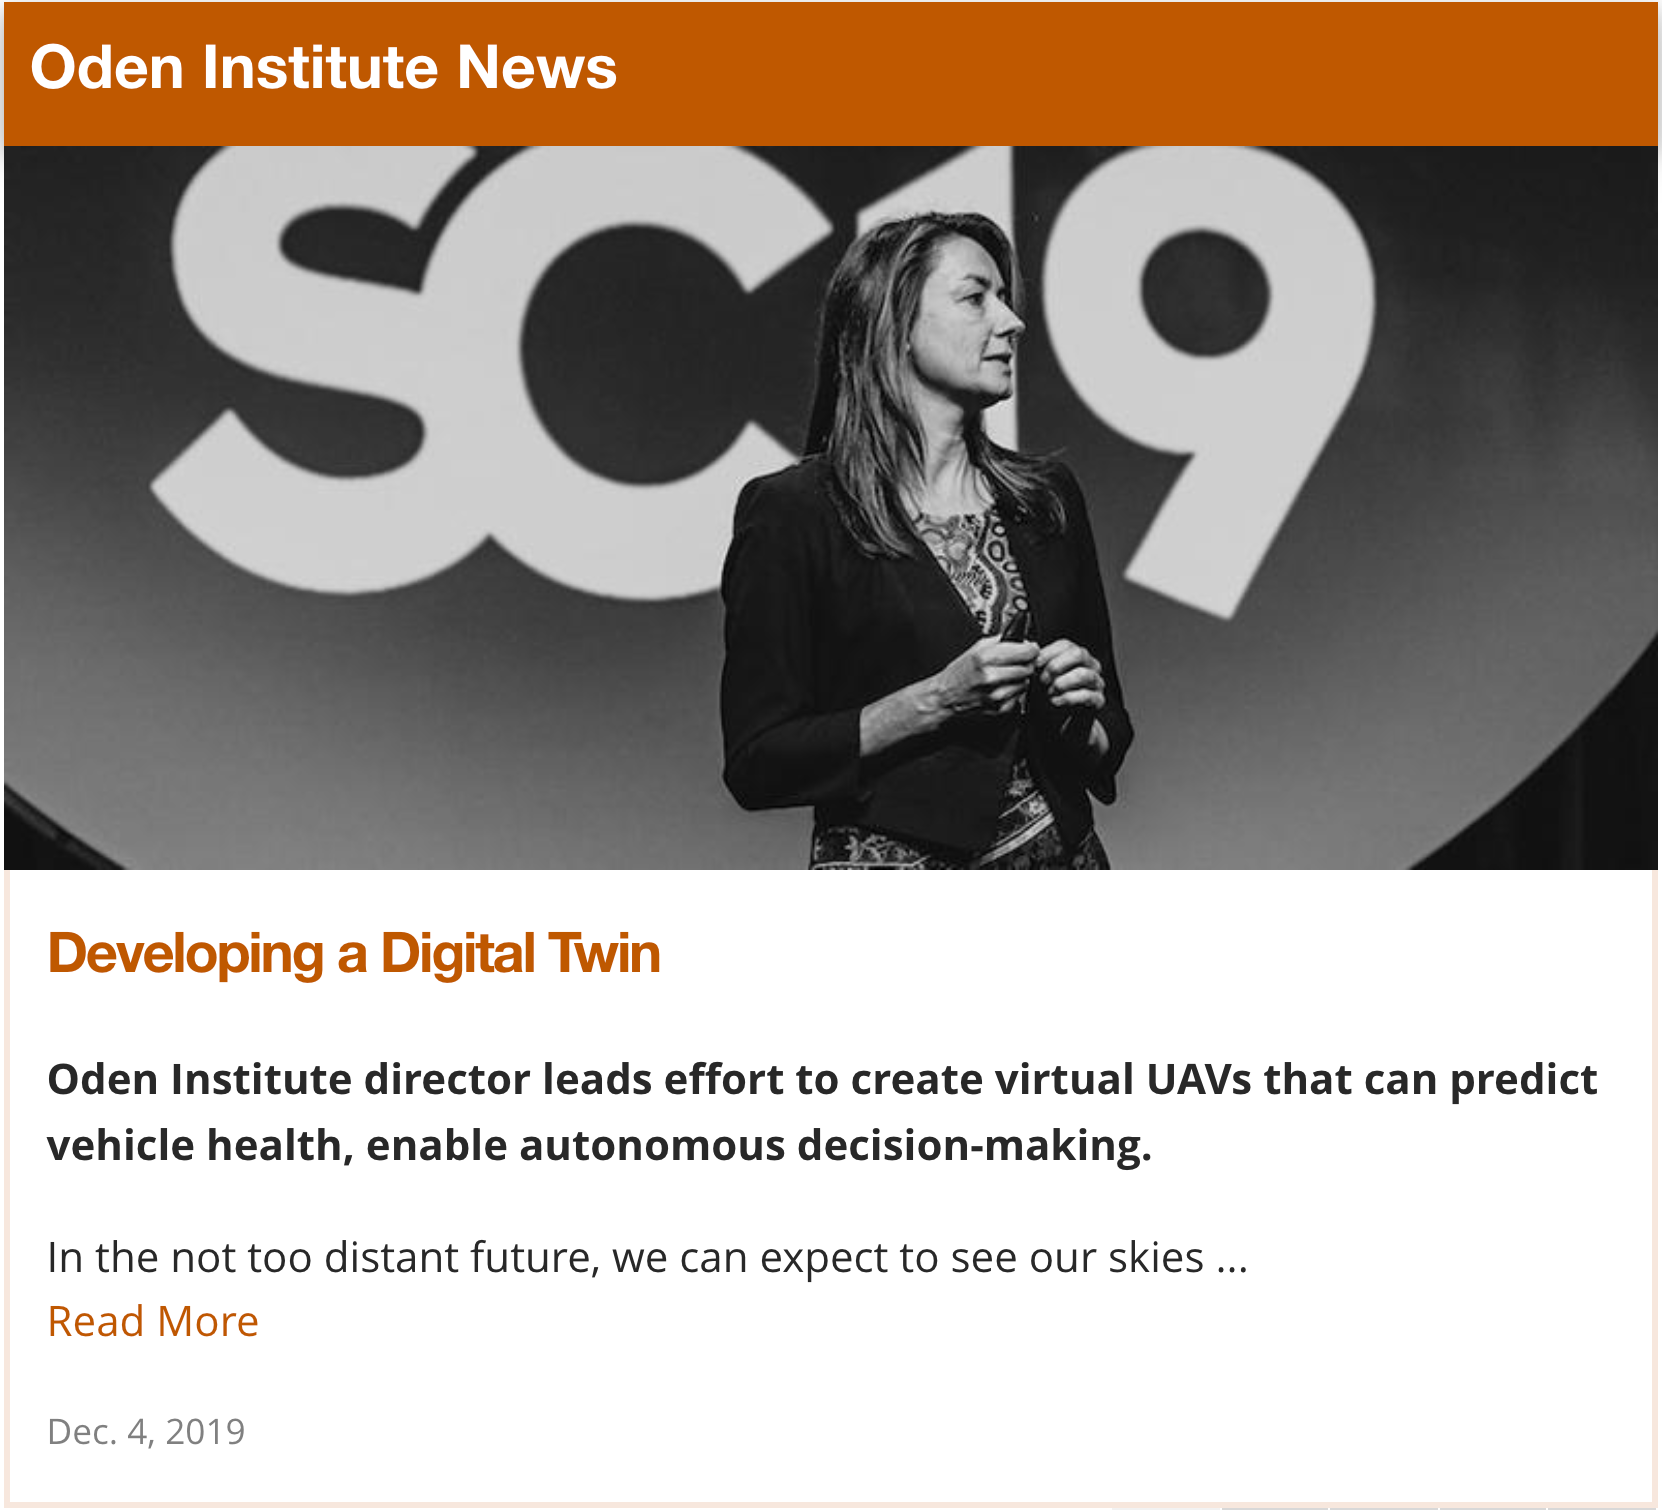 In the Media: Developing a Digital Twin